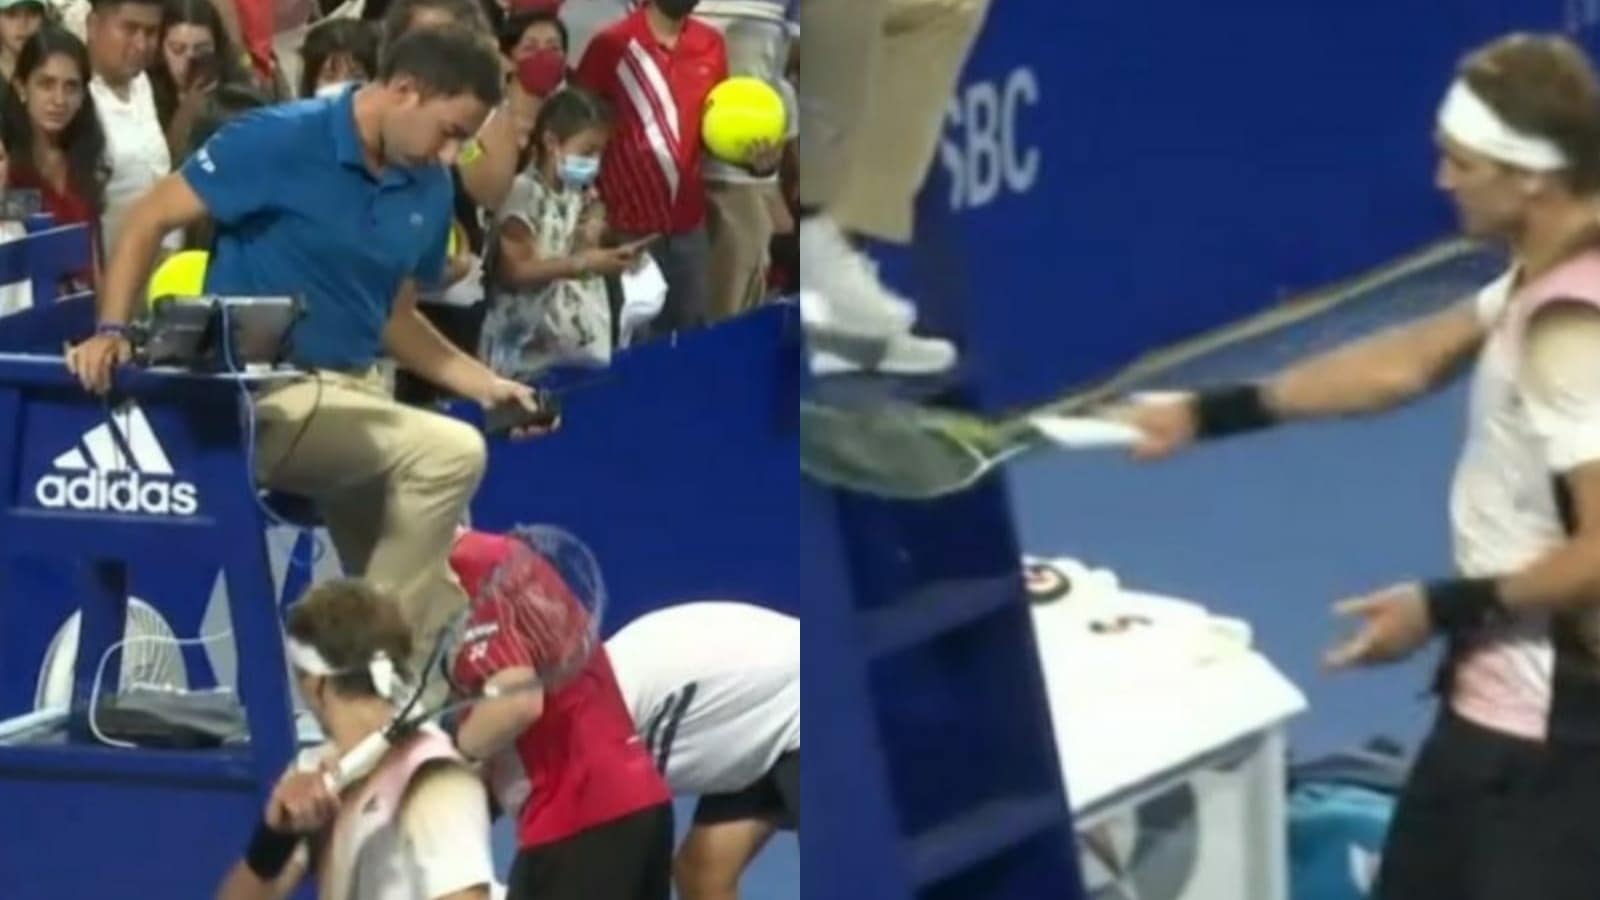 Alexander Zverev kicked-out from Acapulco after angry outburst on umpire - WATCH Tennis News